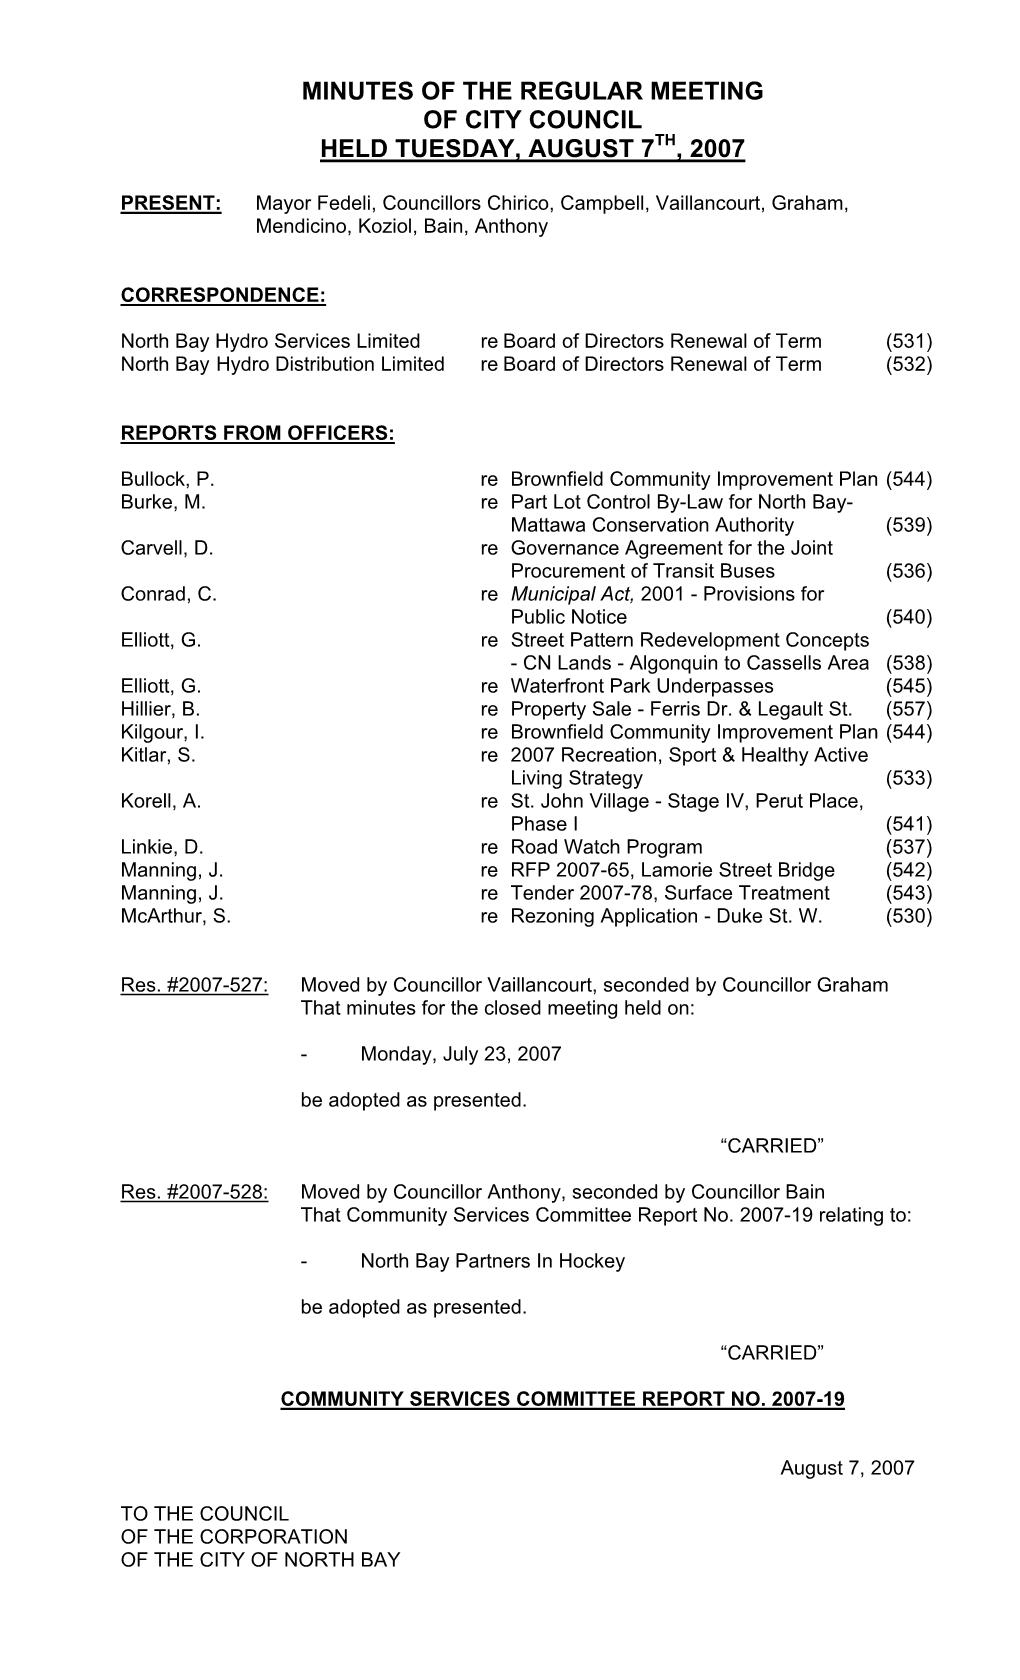 Minutes of the Regular Meeting of City Council Held Tuesday, August 7Th, 2007